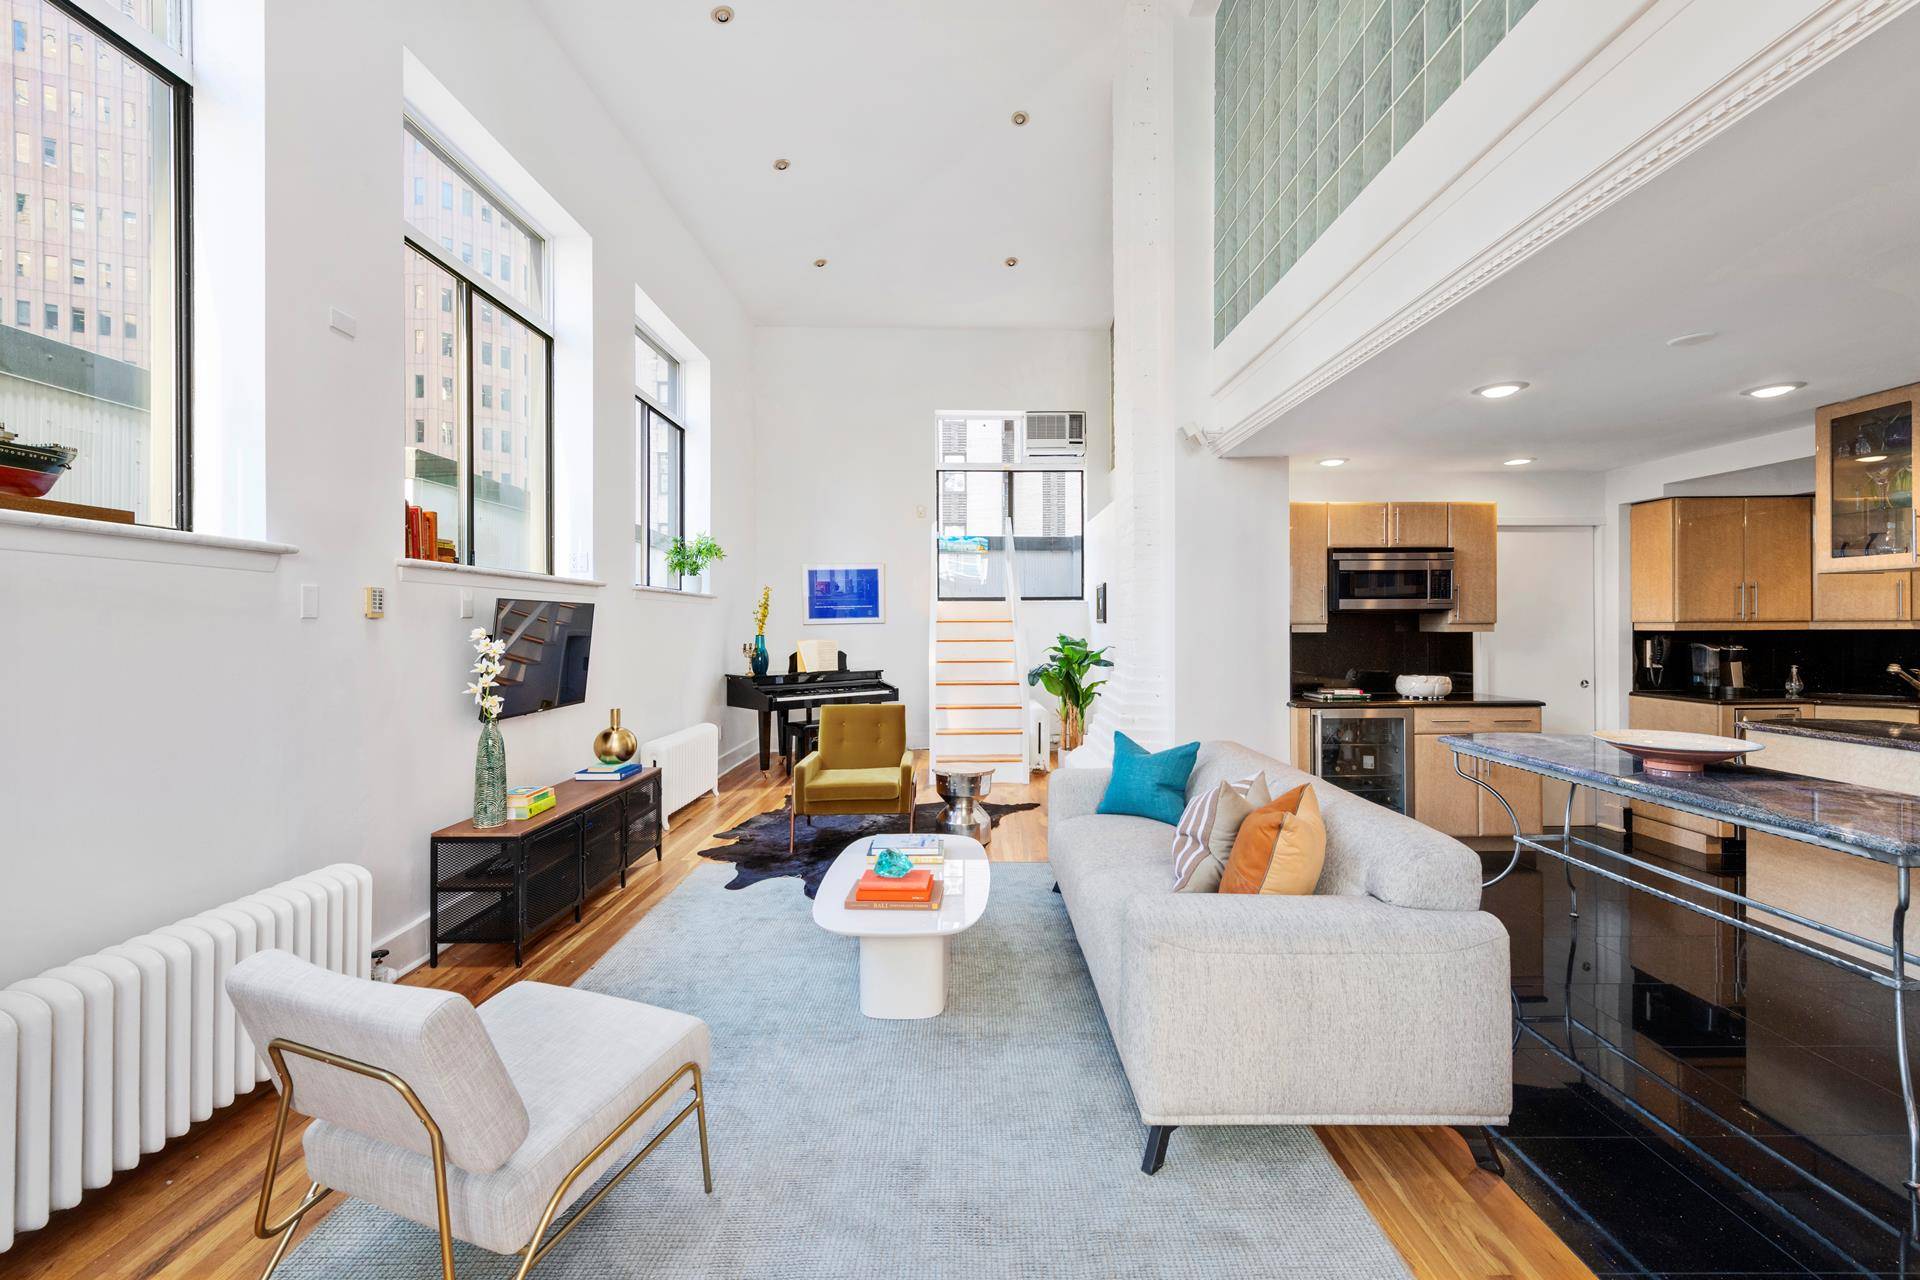 The stunning duplex House in the Sky at 26 Beaver St enjoys exceptional privacy, a wraparound terrace, and fantastic architectural views of lower Manhattan and beyond.